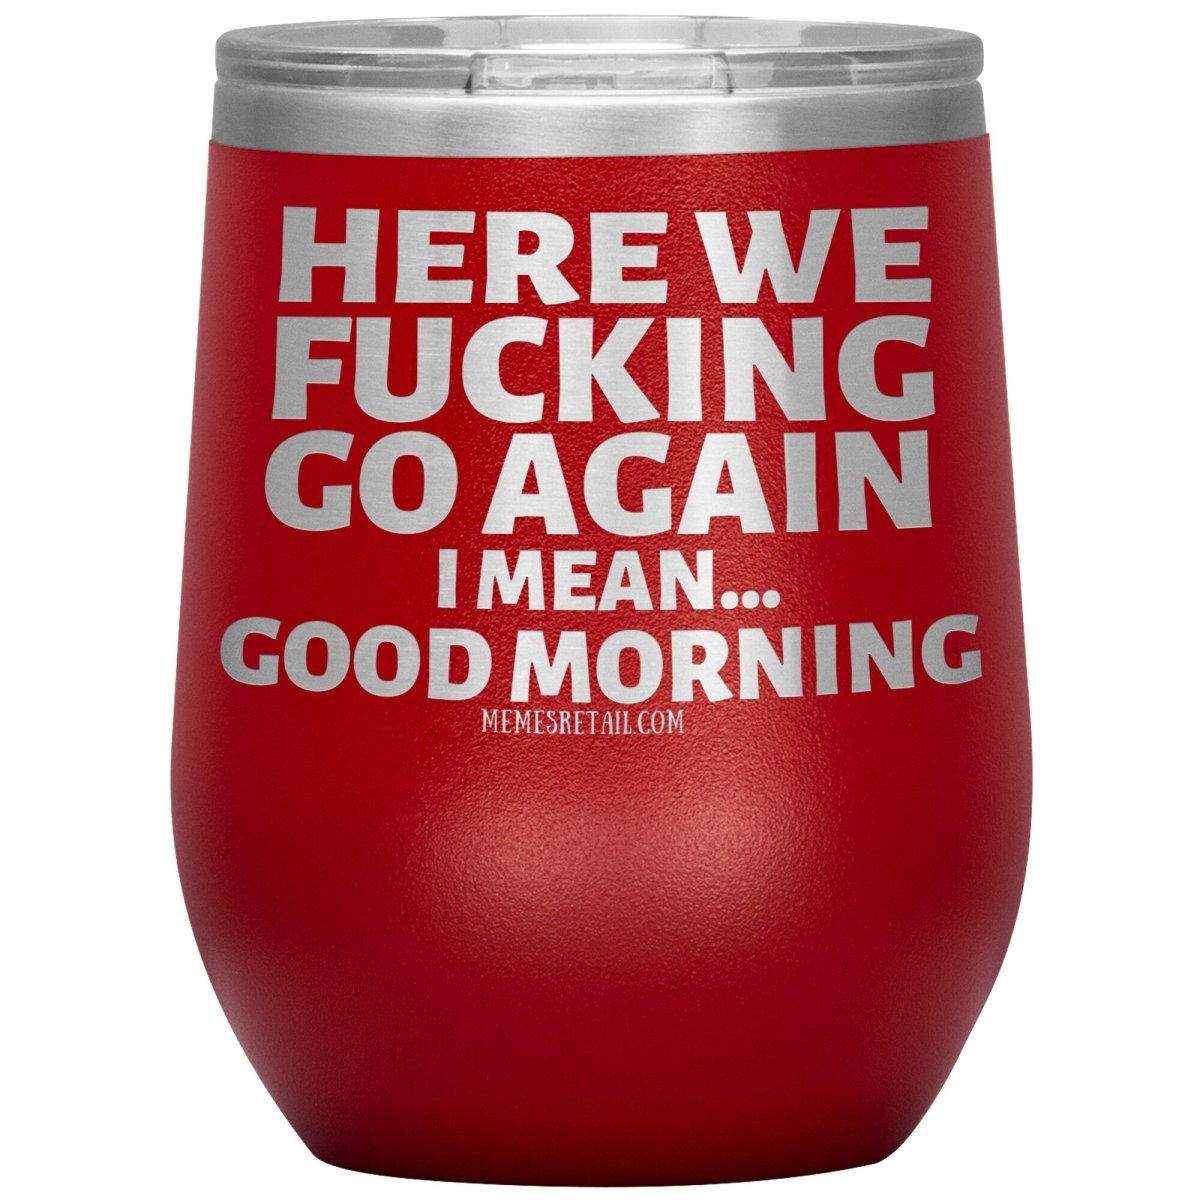 Here We Fucking Go Again, I mean...good morning - Big Lettering Tumblers, 12oz Wine Insulated Tumbler / Red - MemesRetail.com